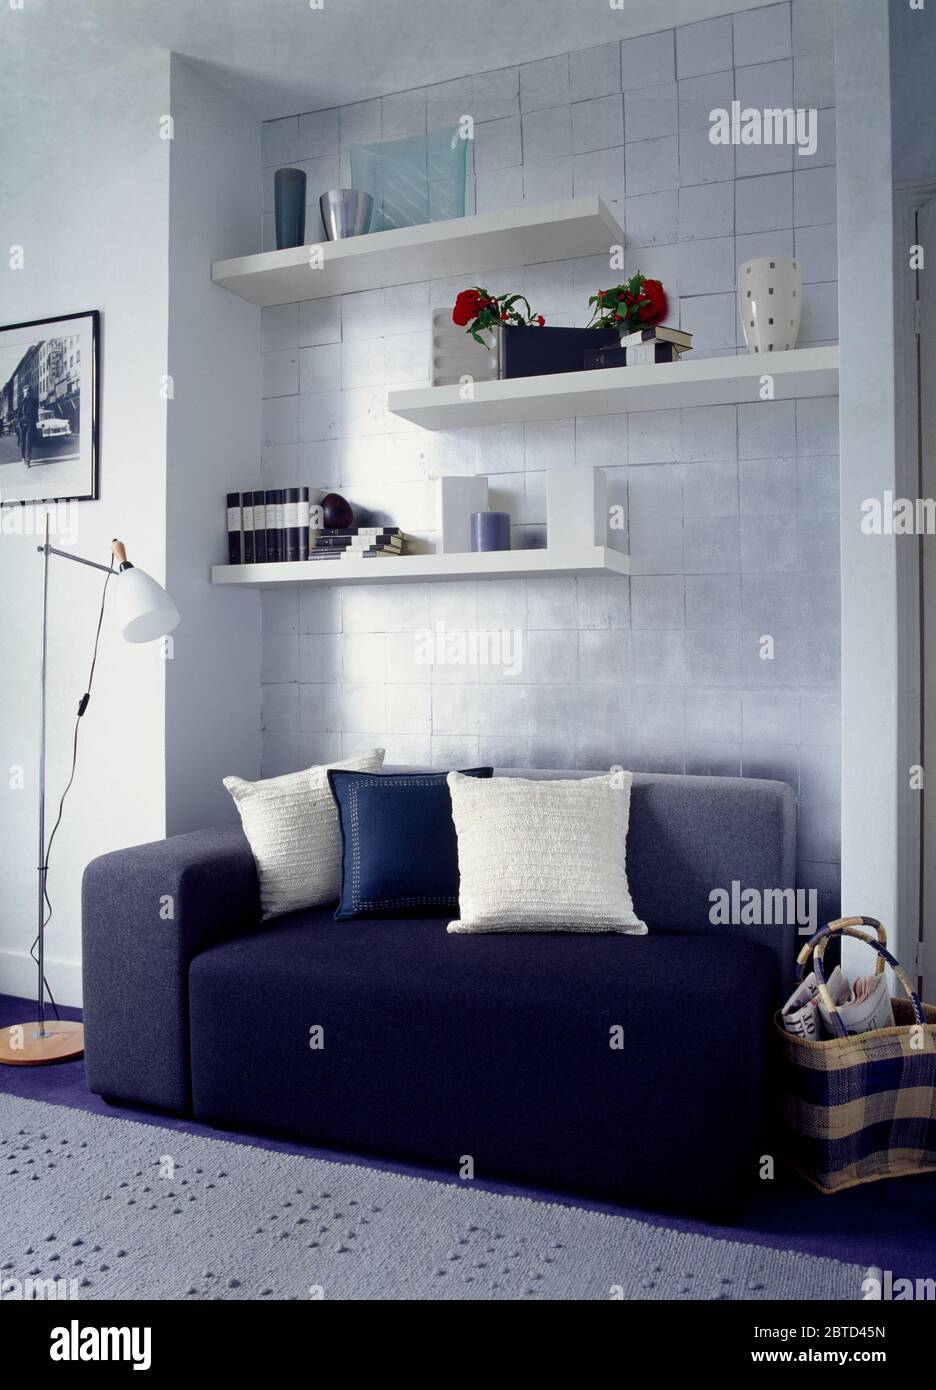 Shelving on tiled wall above blue sofa with white cushions Stock Photo